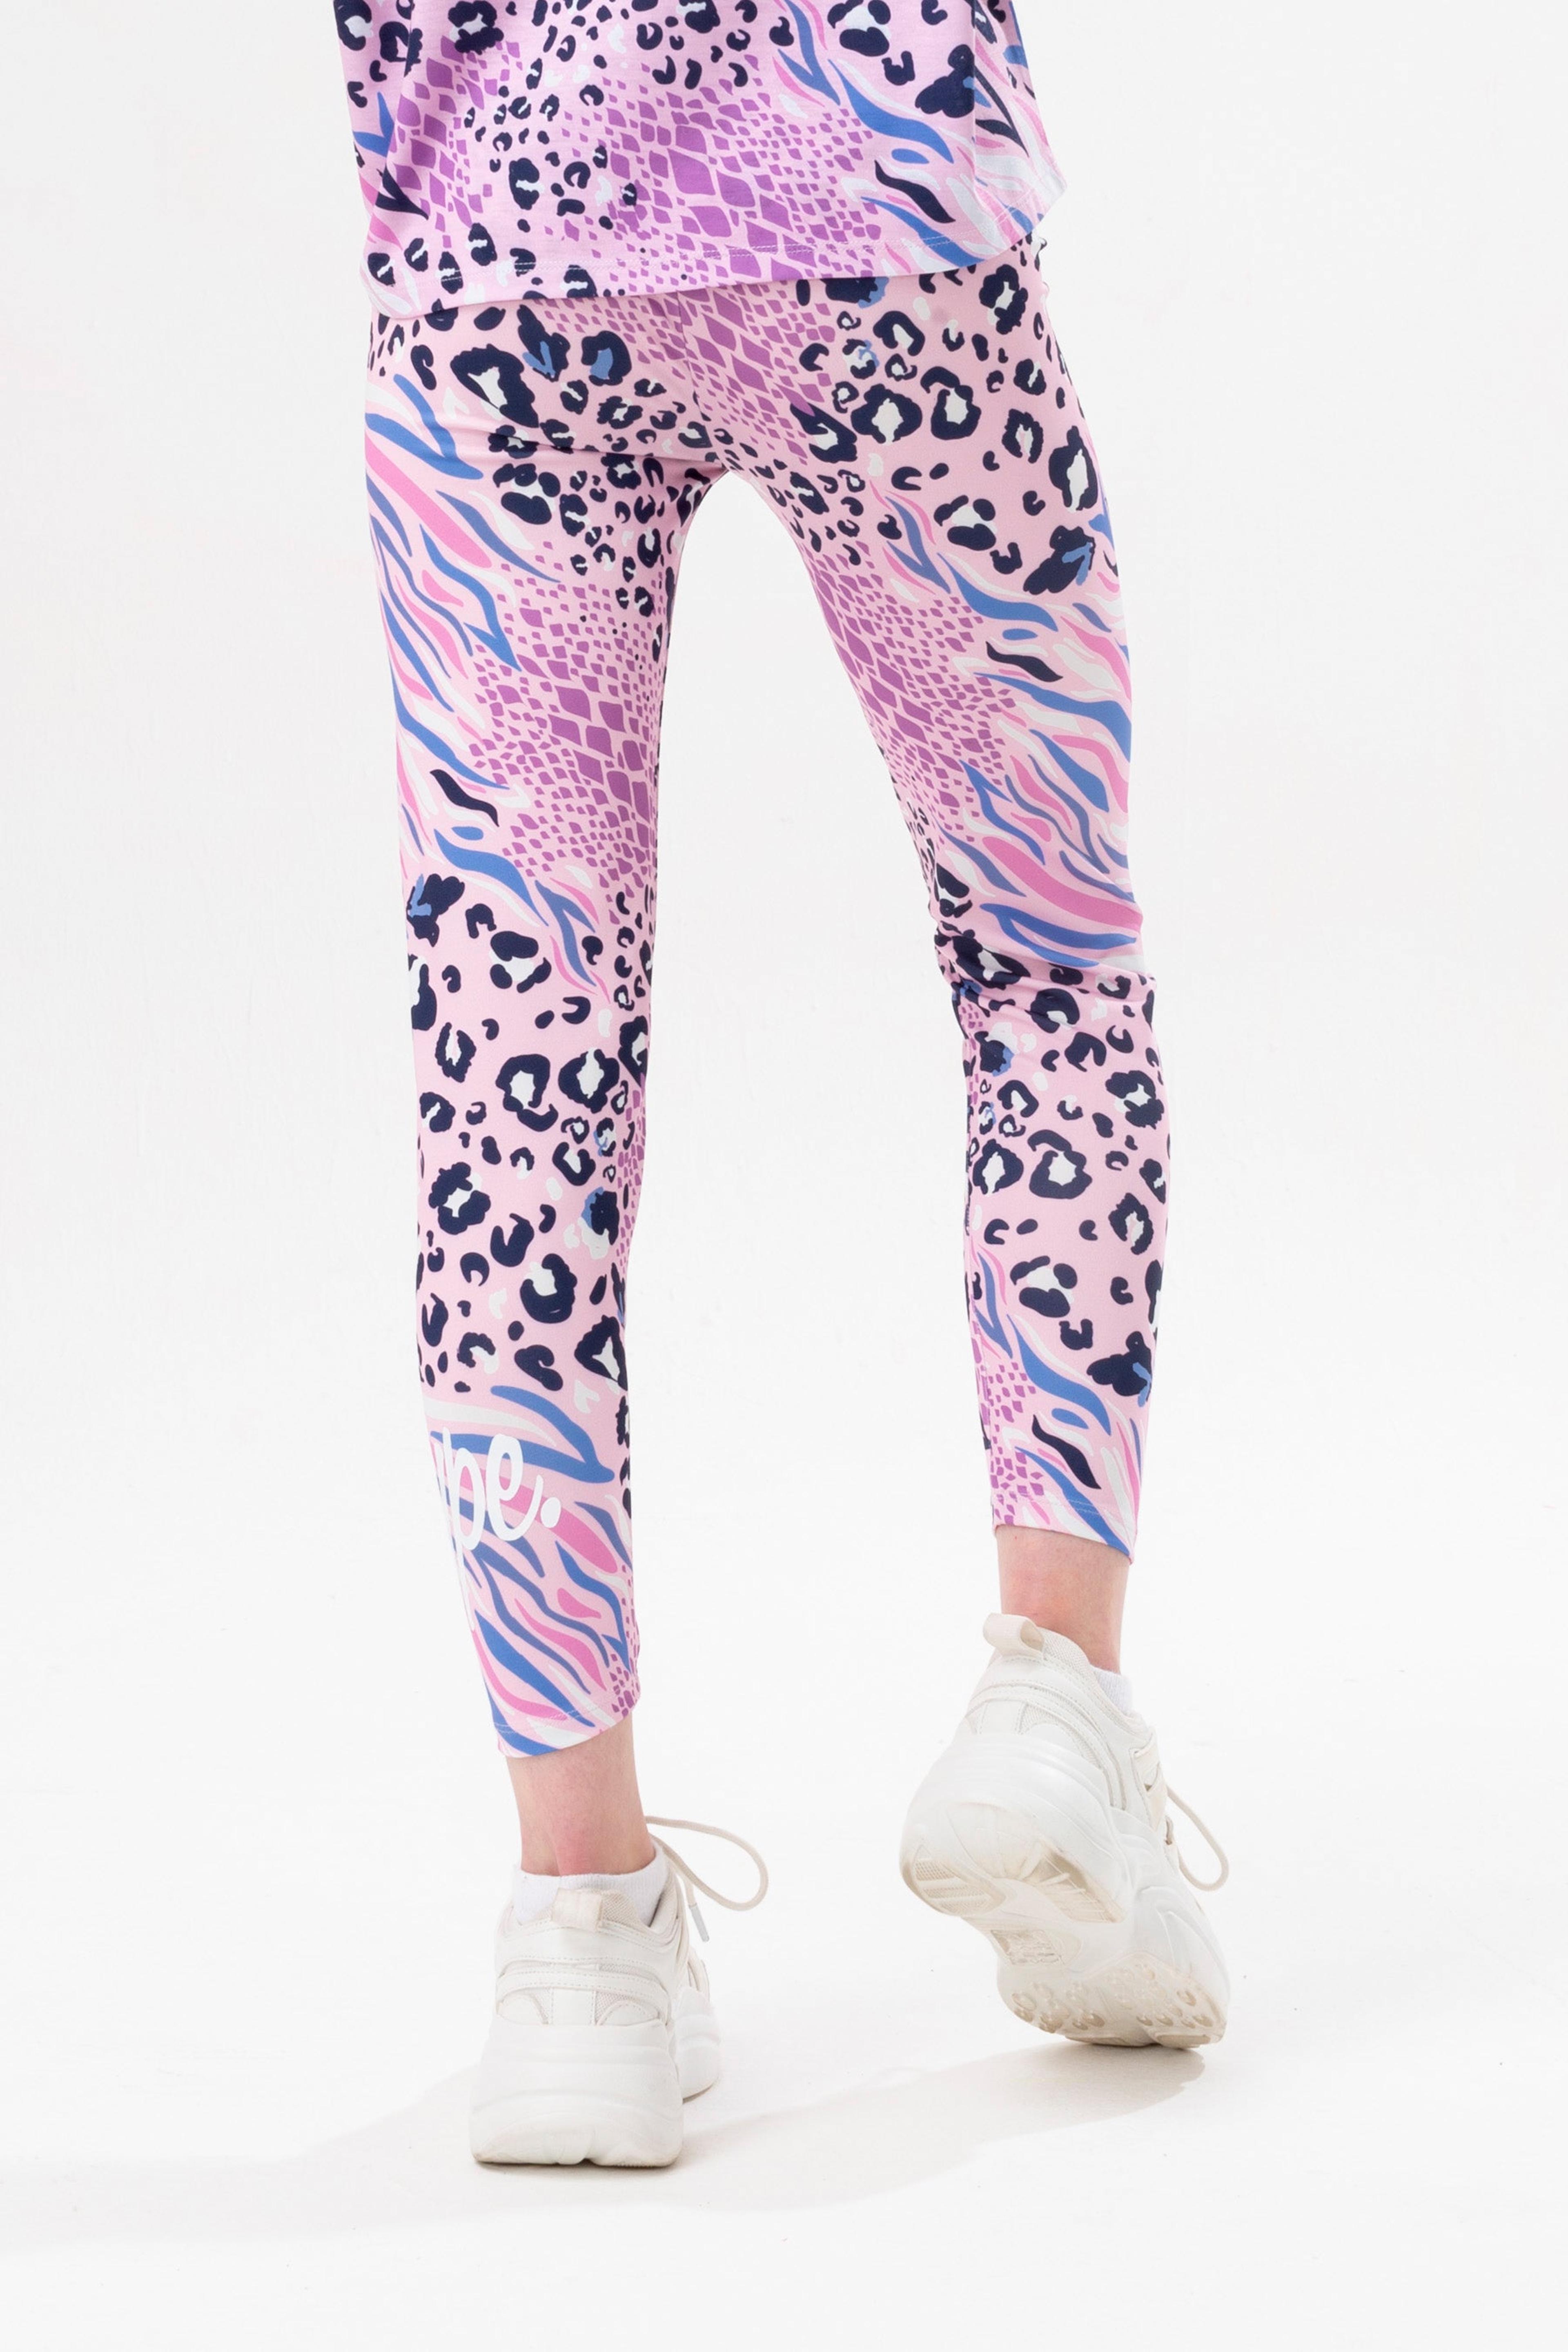 Alternate View 1 of HYPE GIRLS PINK ABSTRACT LEOPARD SCRIPT LEGGINGS